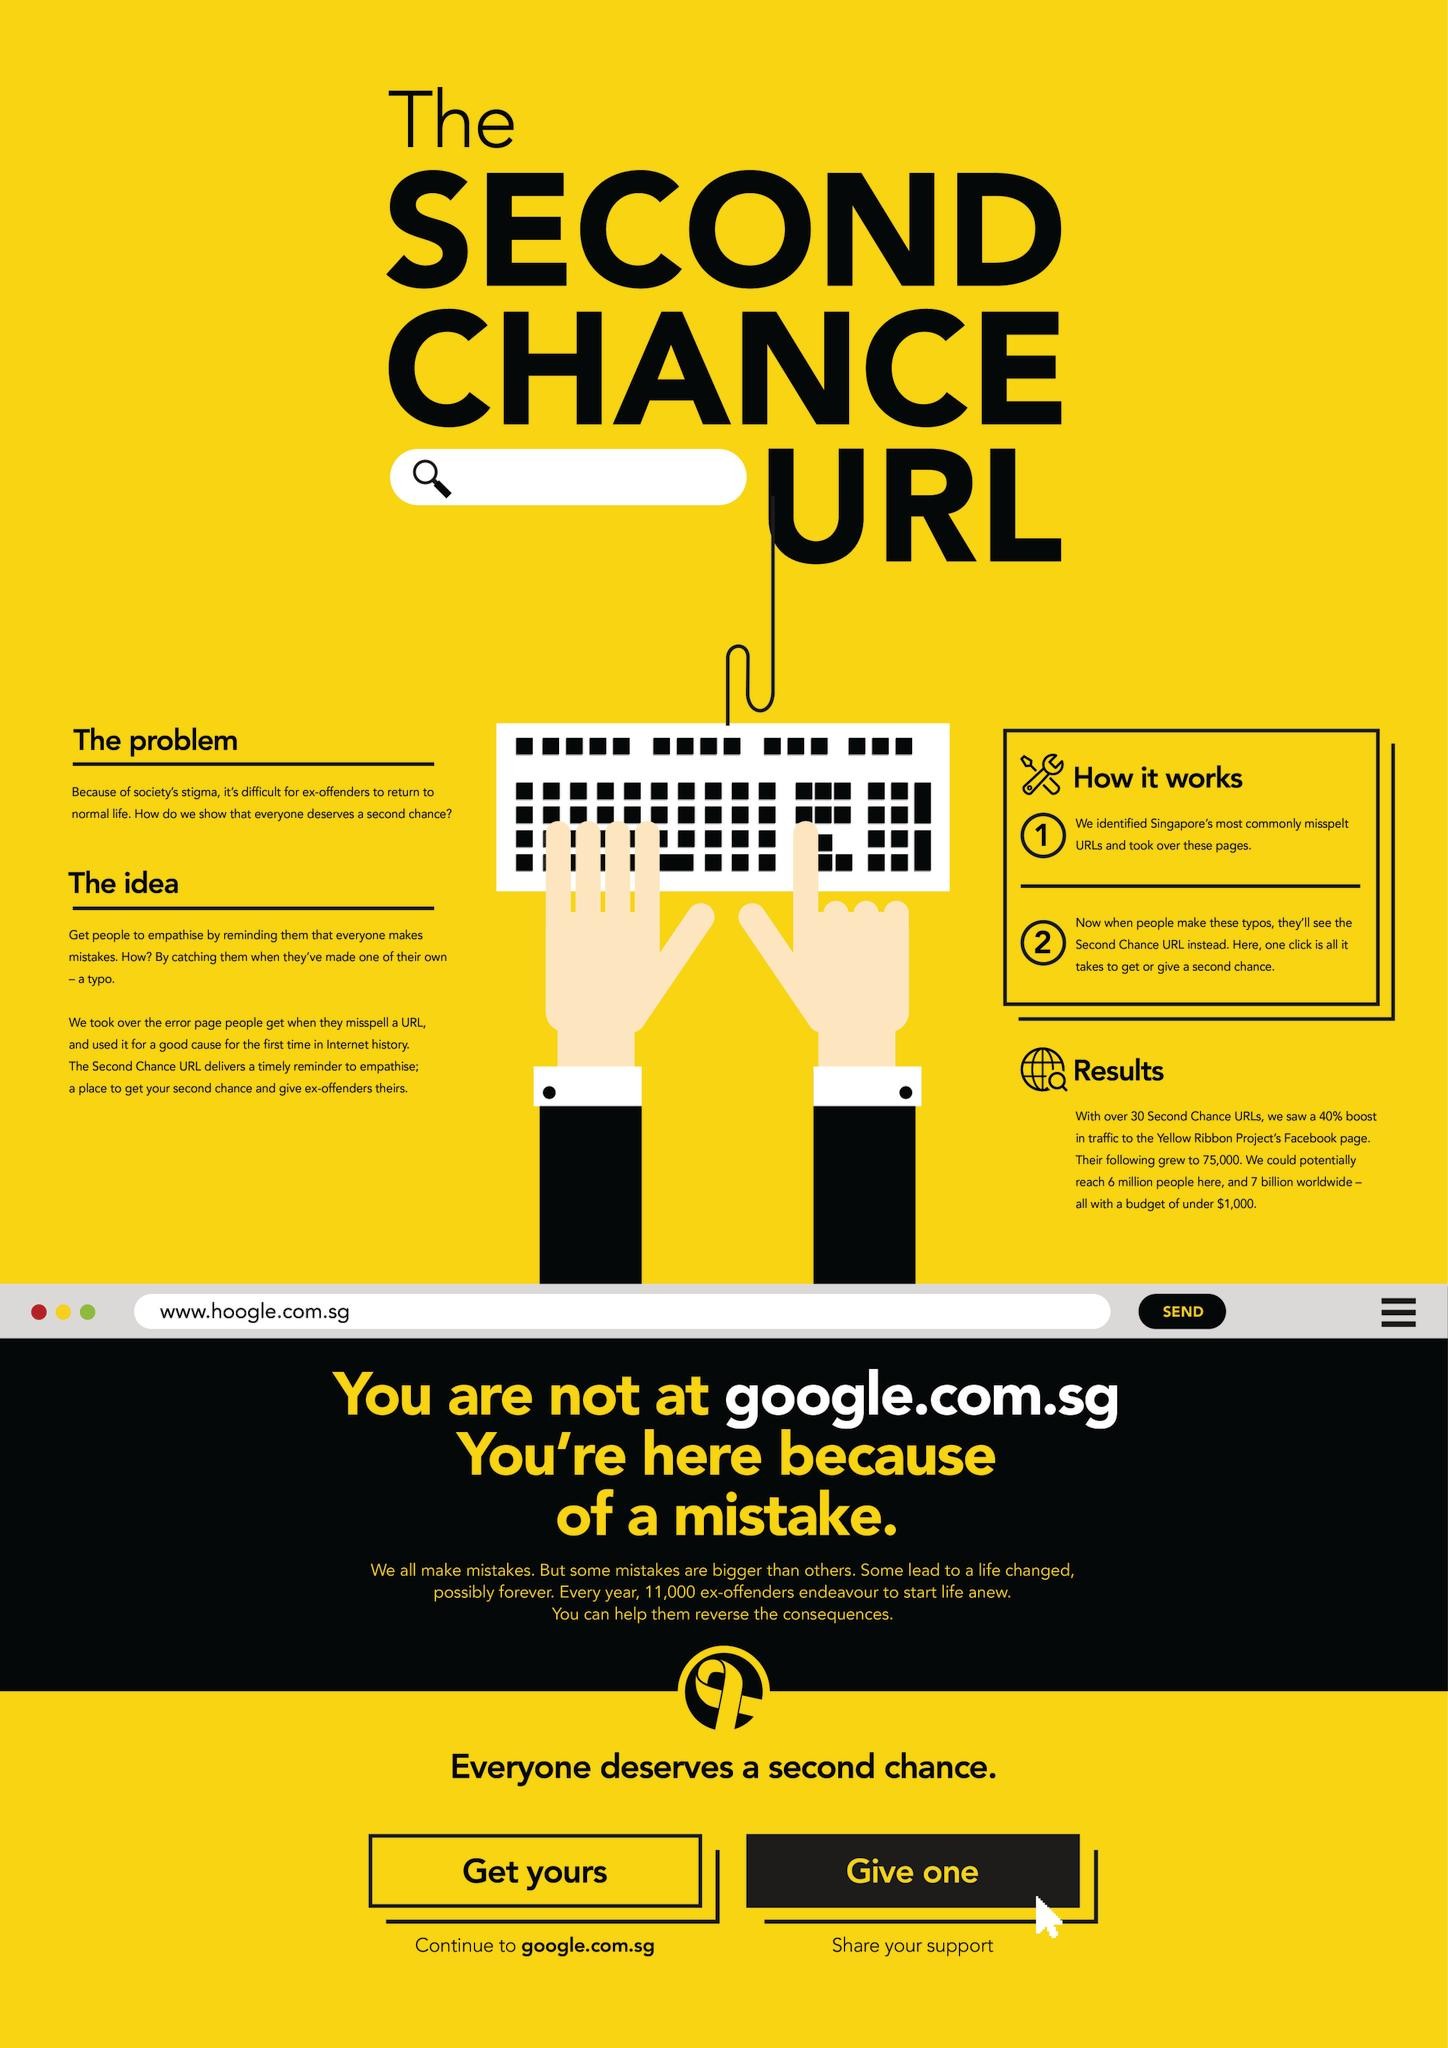 THE SECOND CHANCE URL